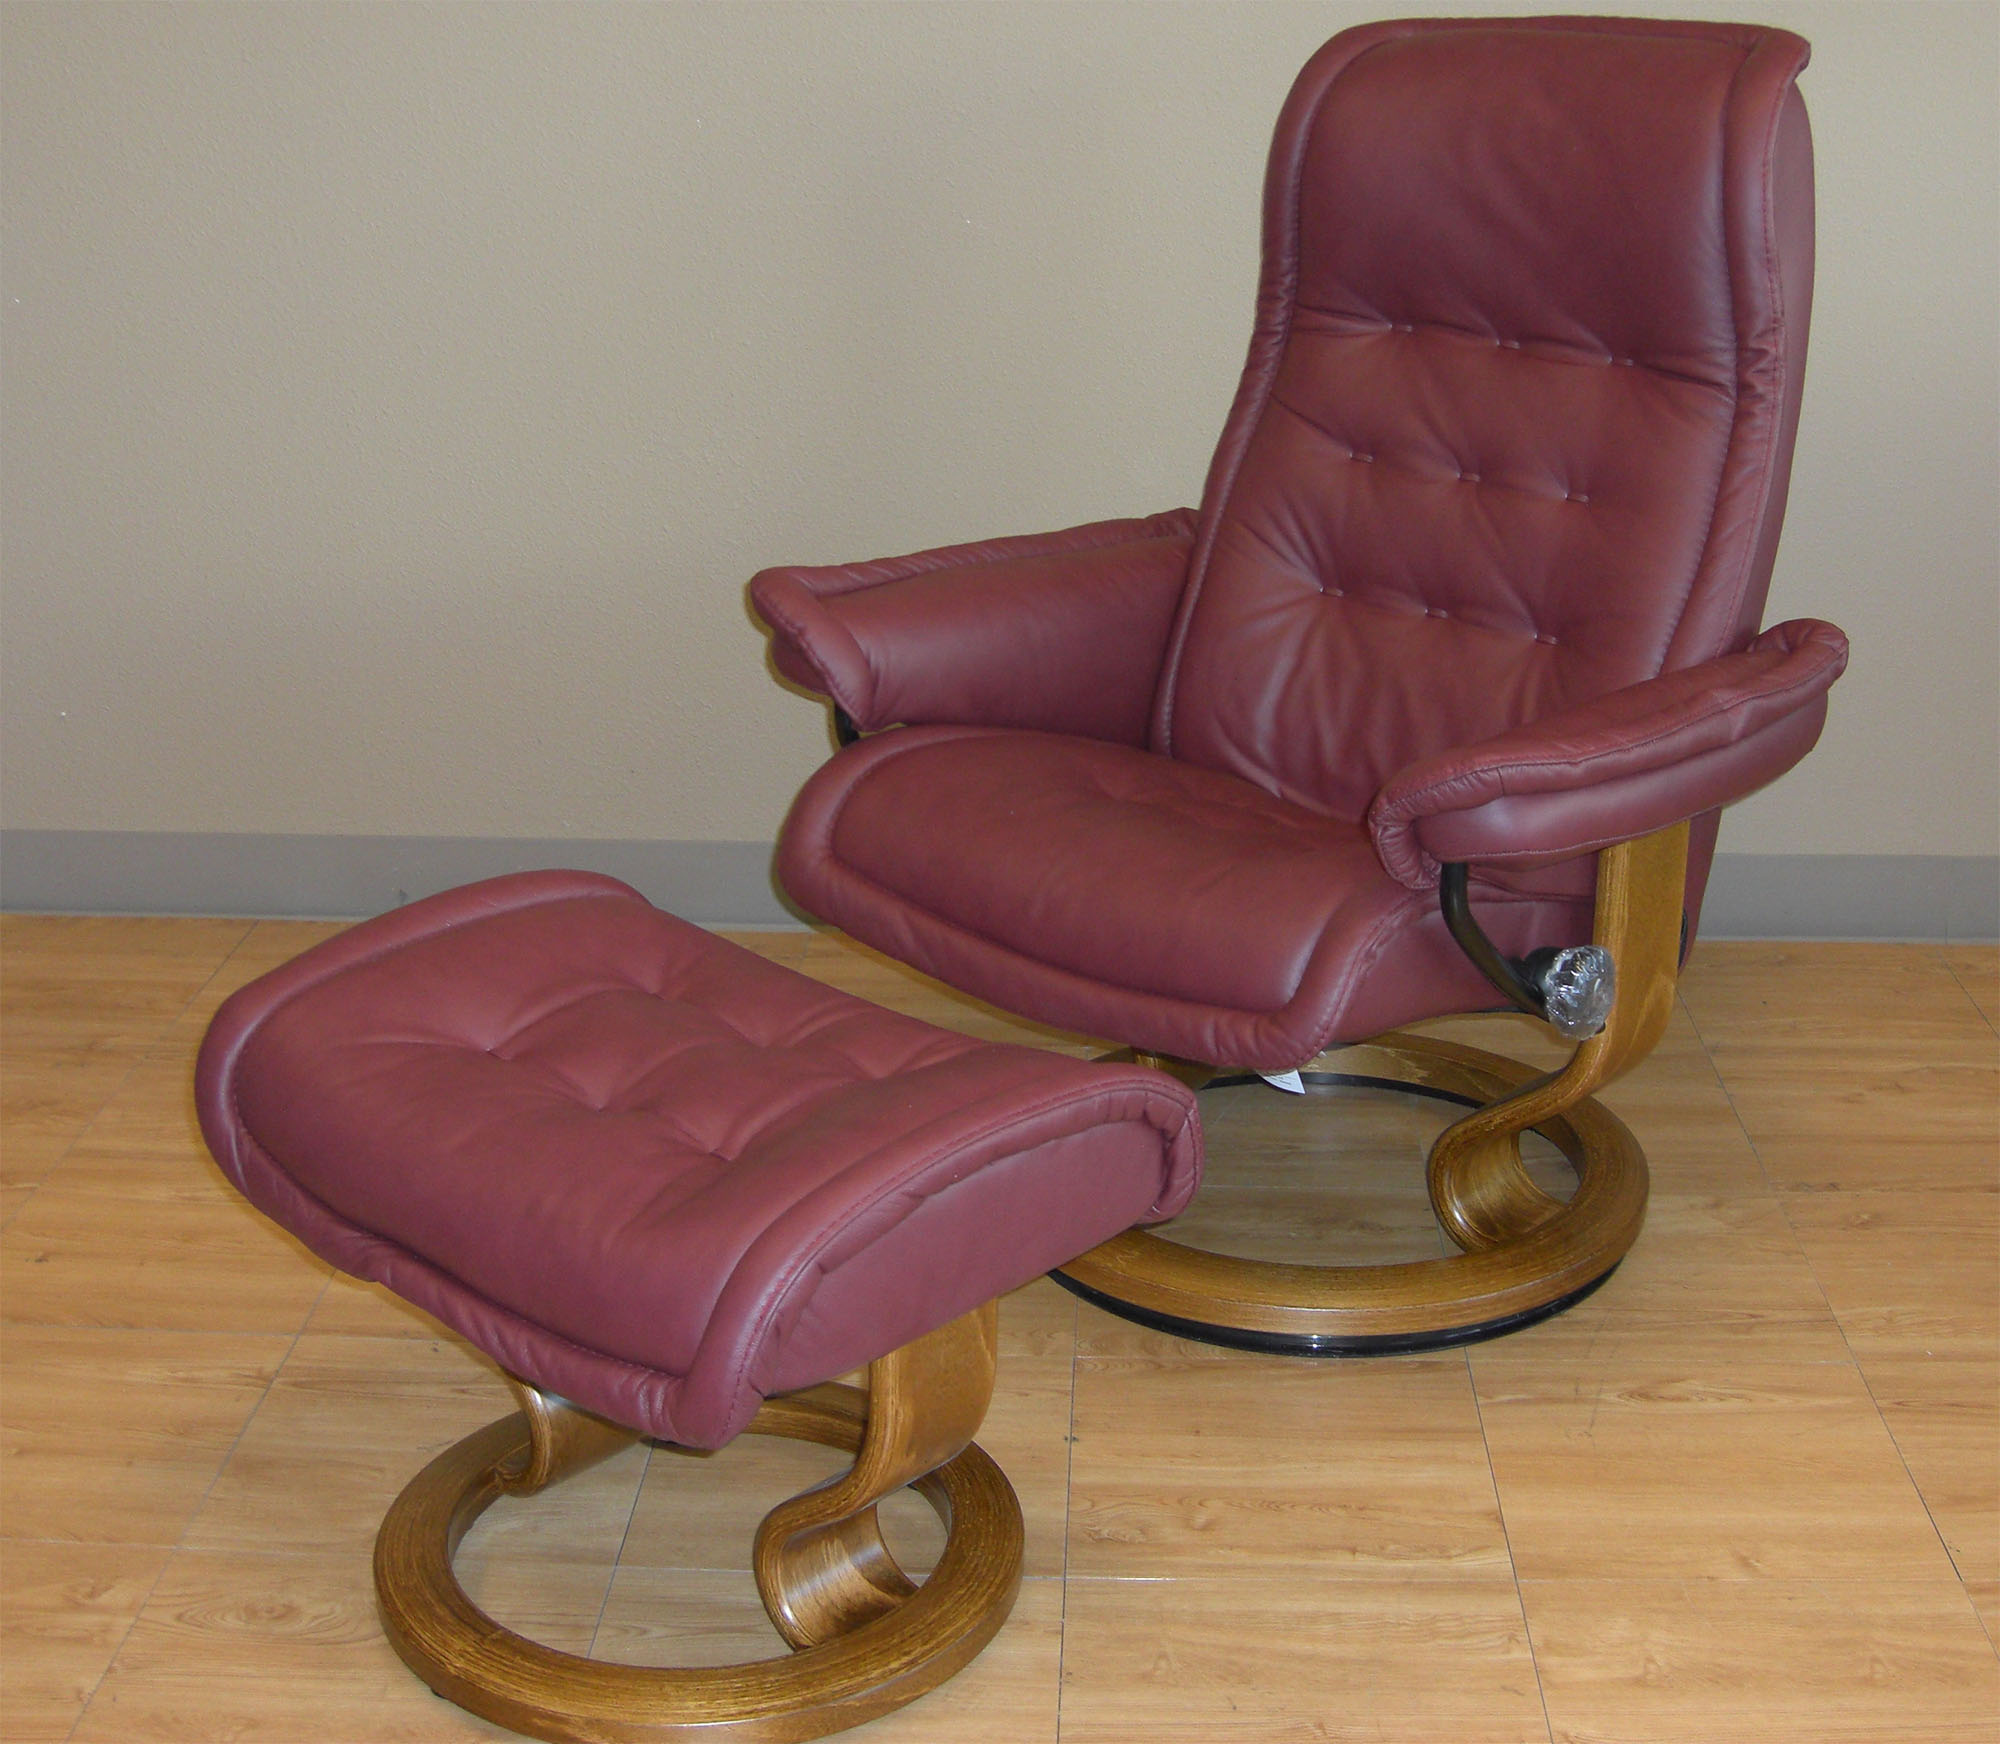 Stressless Paloma New Winered 09427 Leather Color Recliner Chair and Ottoman from Ekornes